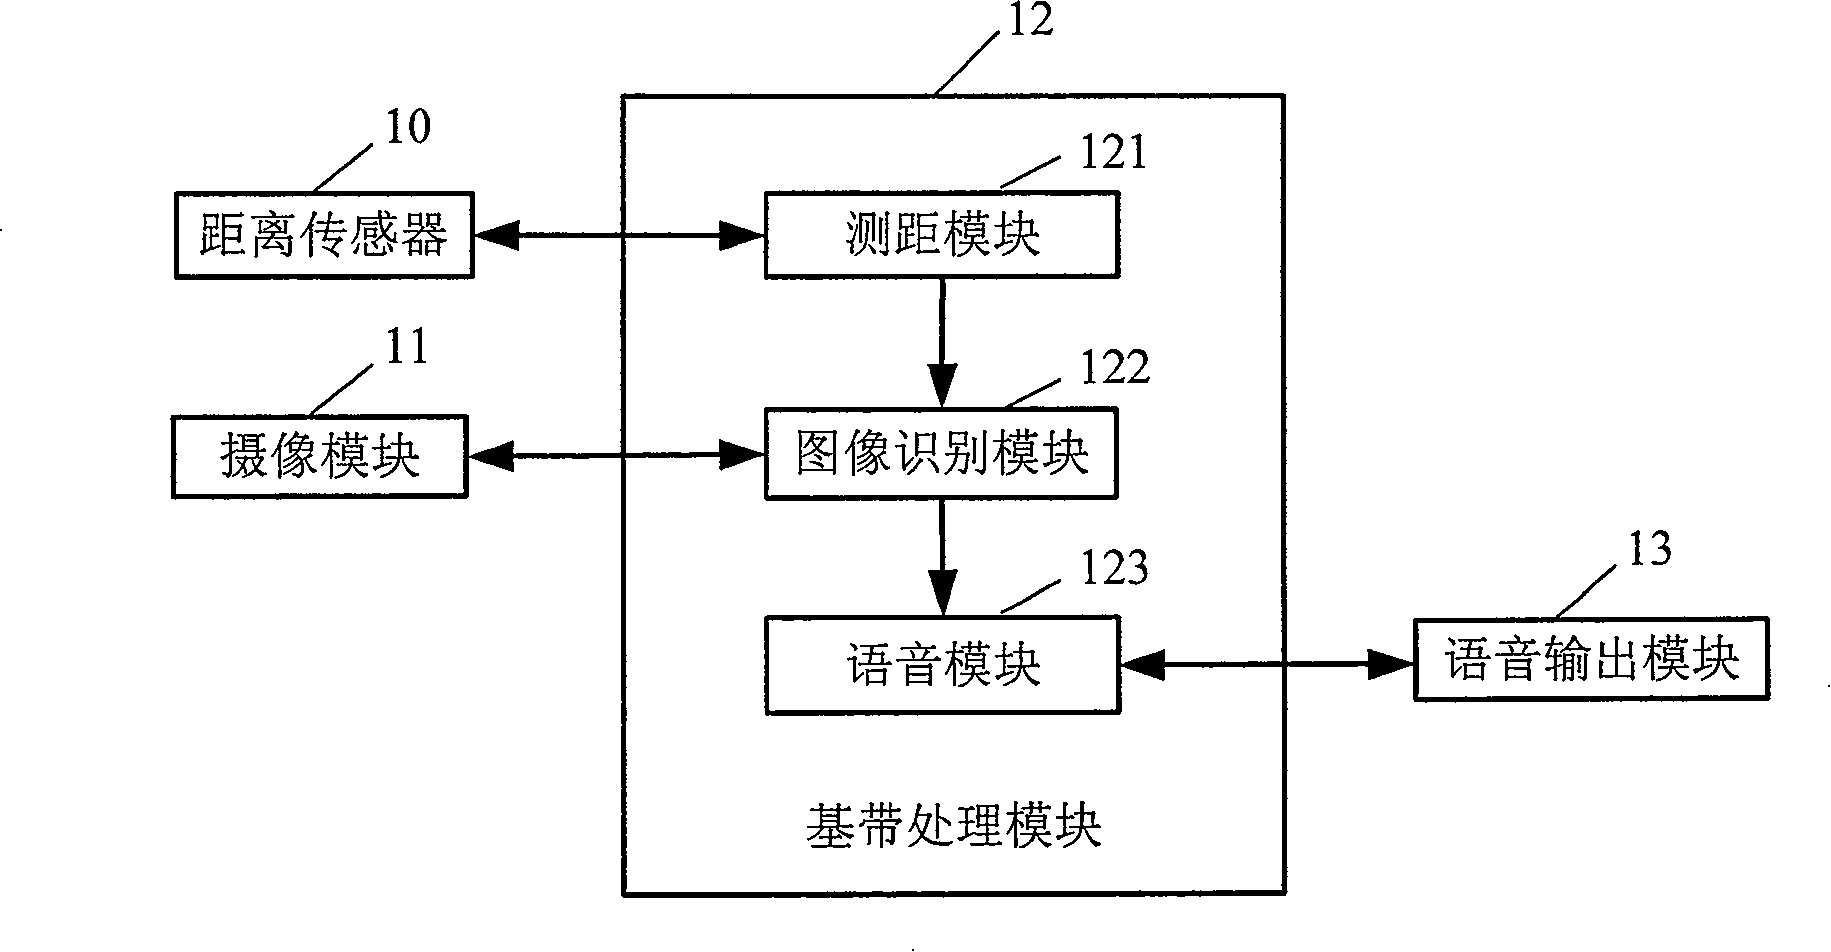 Blind guiding mobile phone and blind guiding method